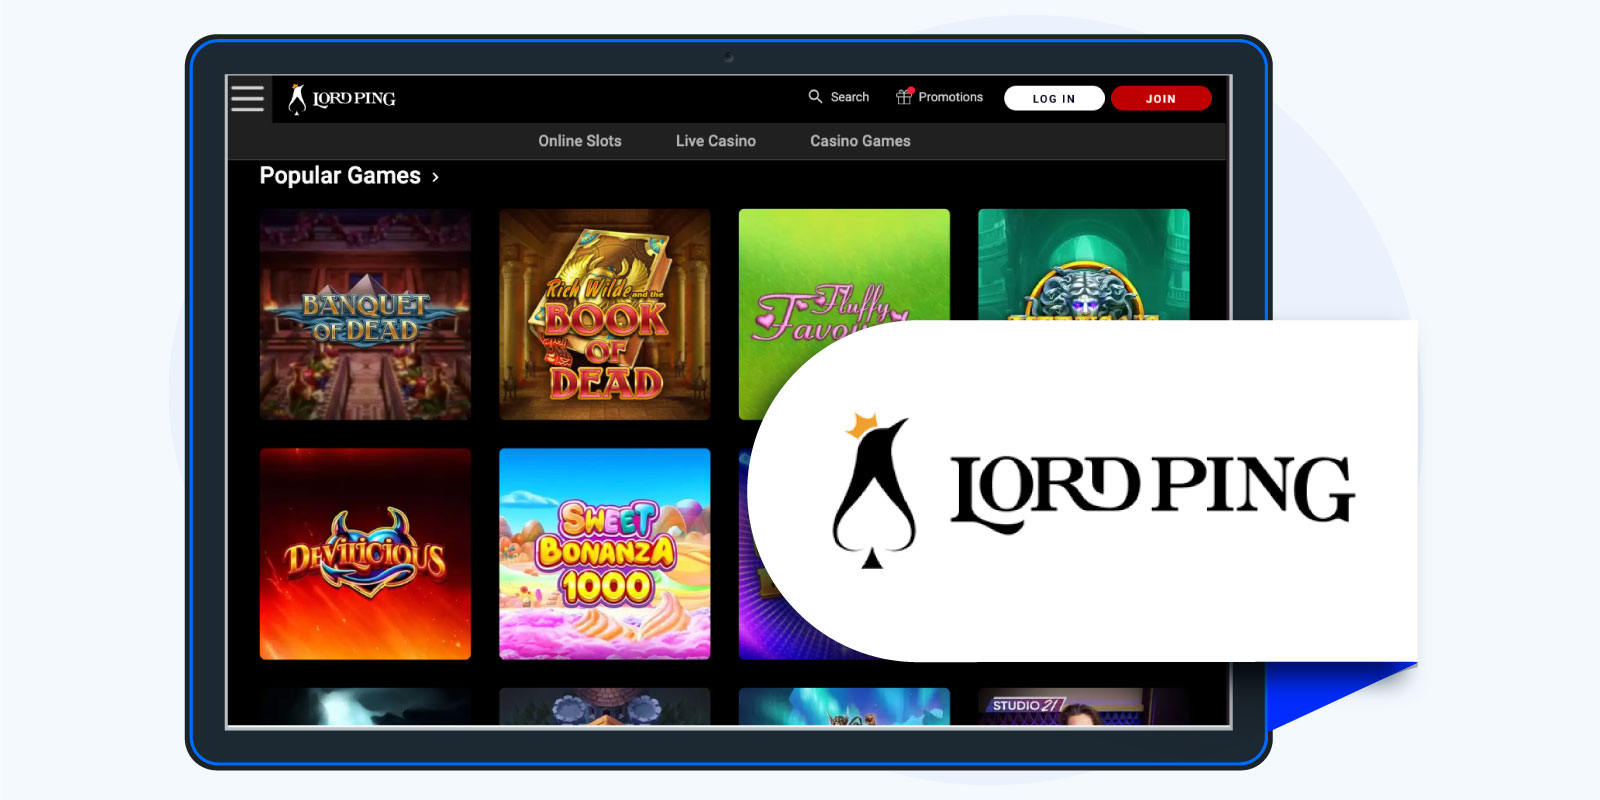 Lord Ping - Best minimum deposit online casino for live casino games